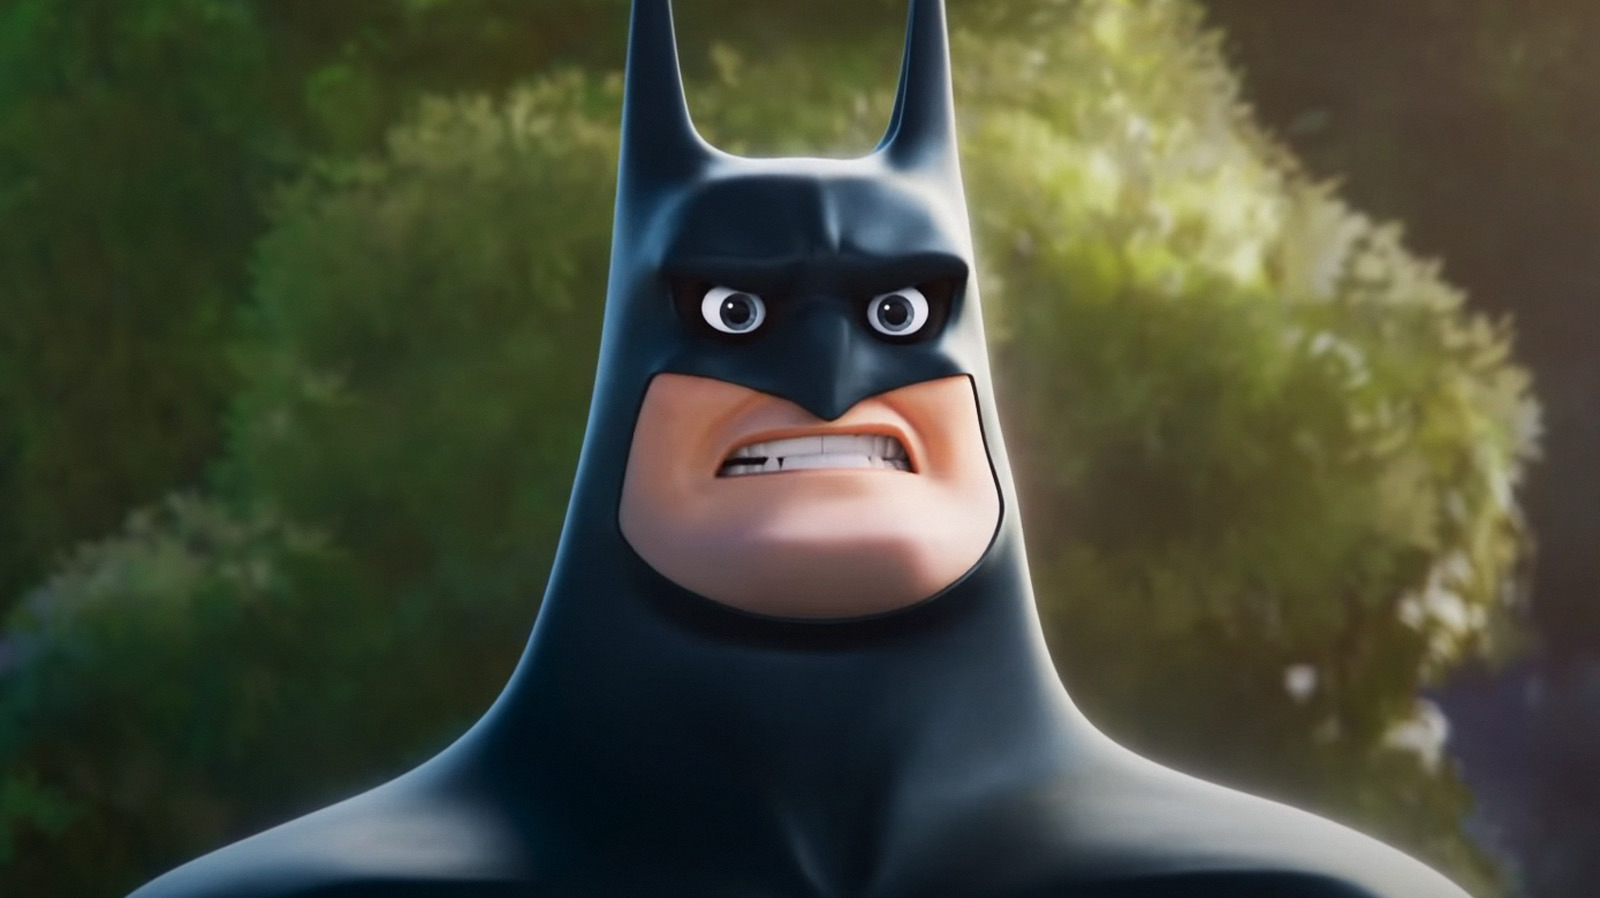 Keanu Reeves Is The Voice Of Batman In New DC League Of Super-Pets